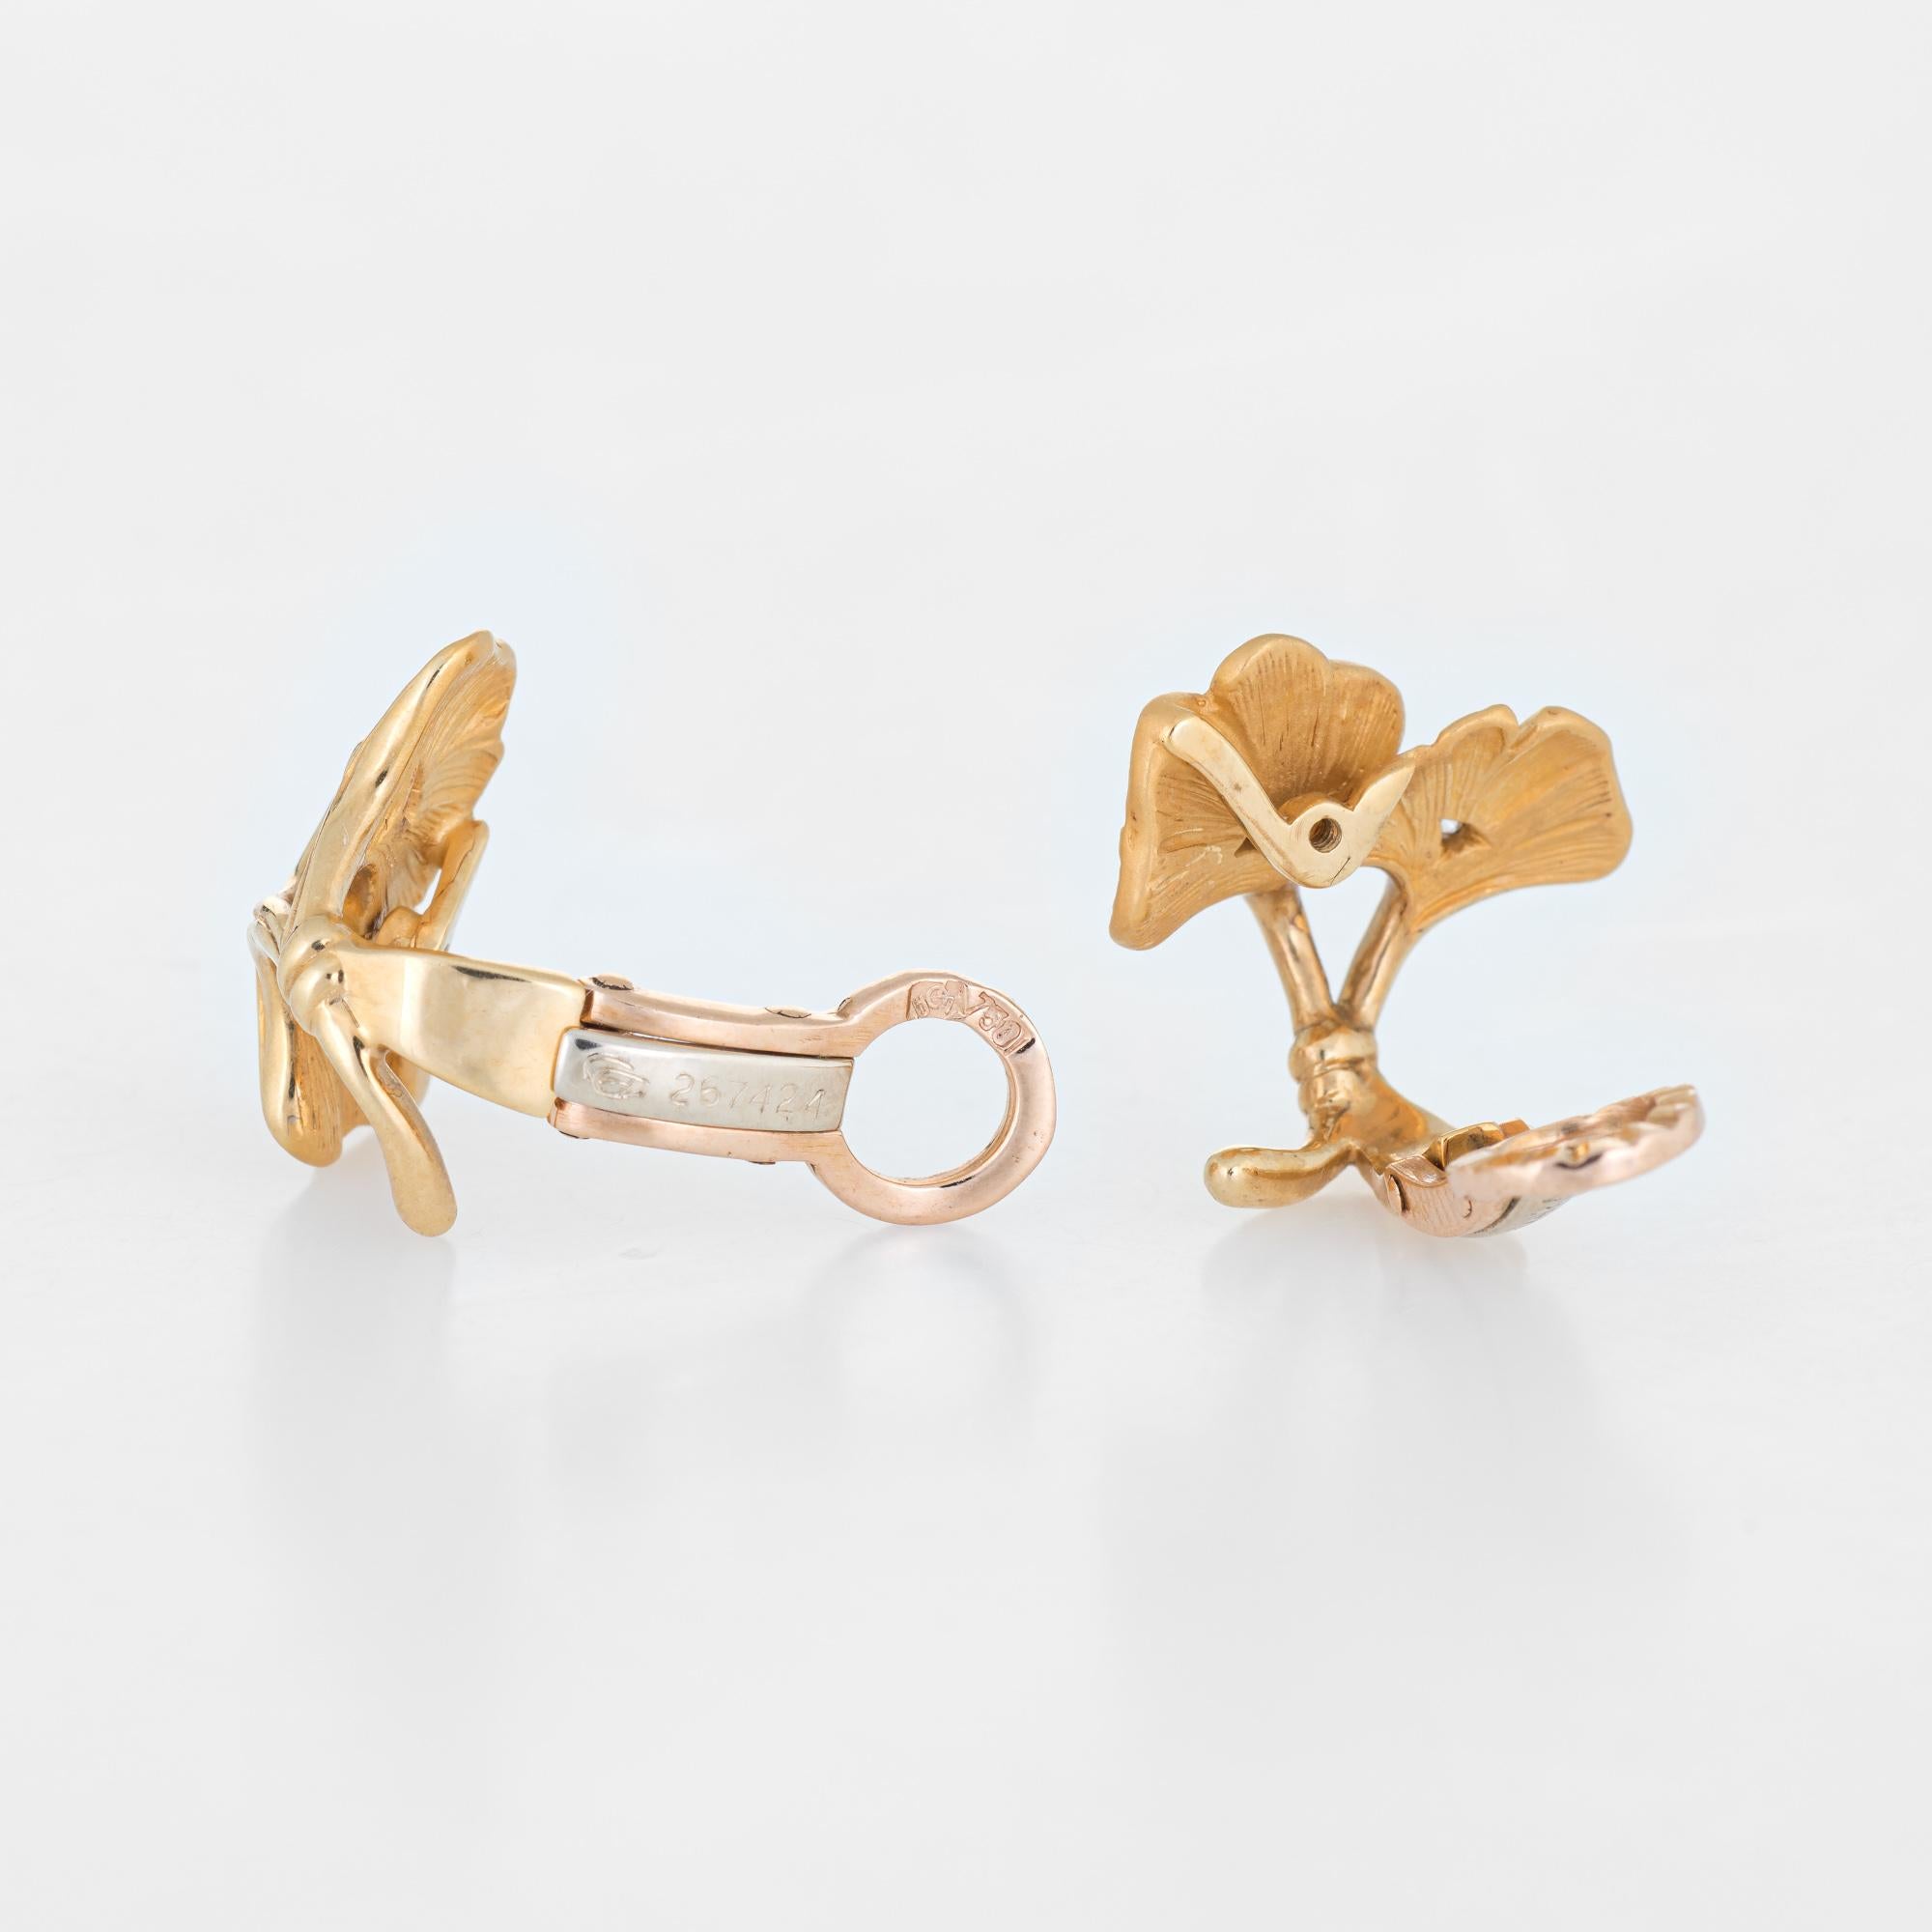 Elegant pair of pre owned Carrera y Carrera diamond earrings, crafted in 18k yellow gold. 

Four diamonds total an estimated 0.04 carats (estimated at G-H color and VS1 clarity). 

The earrings are crafted in the form of a Ginko leaf. In Japanese